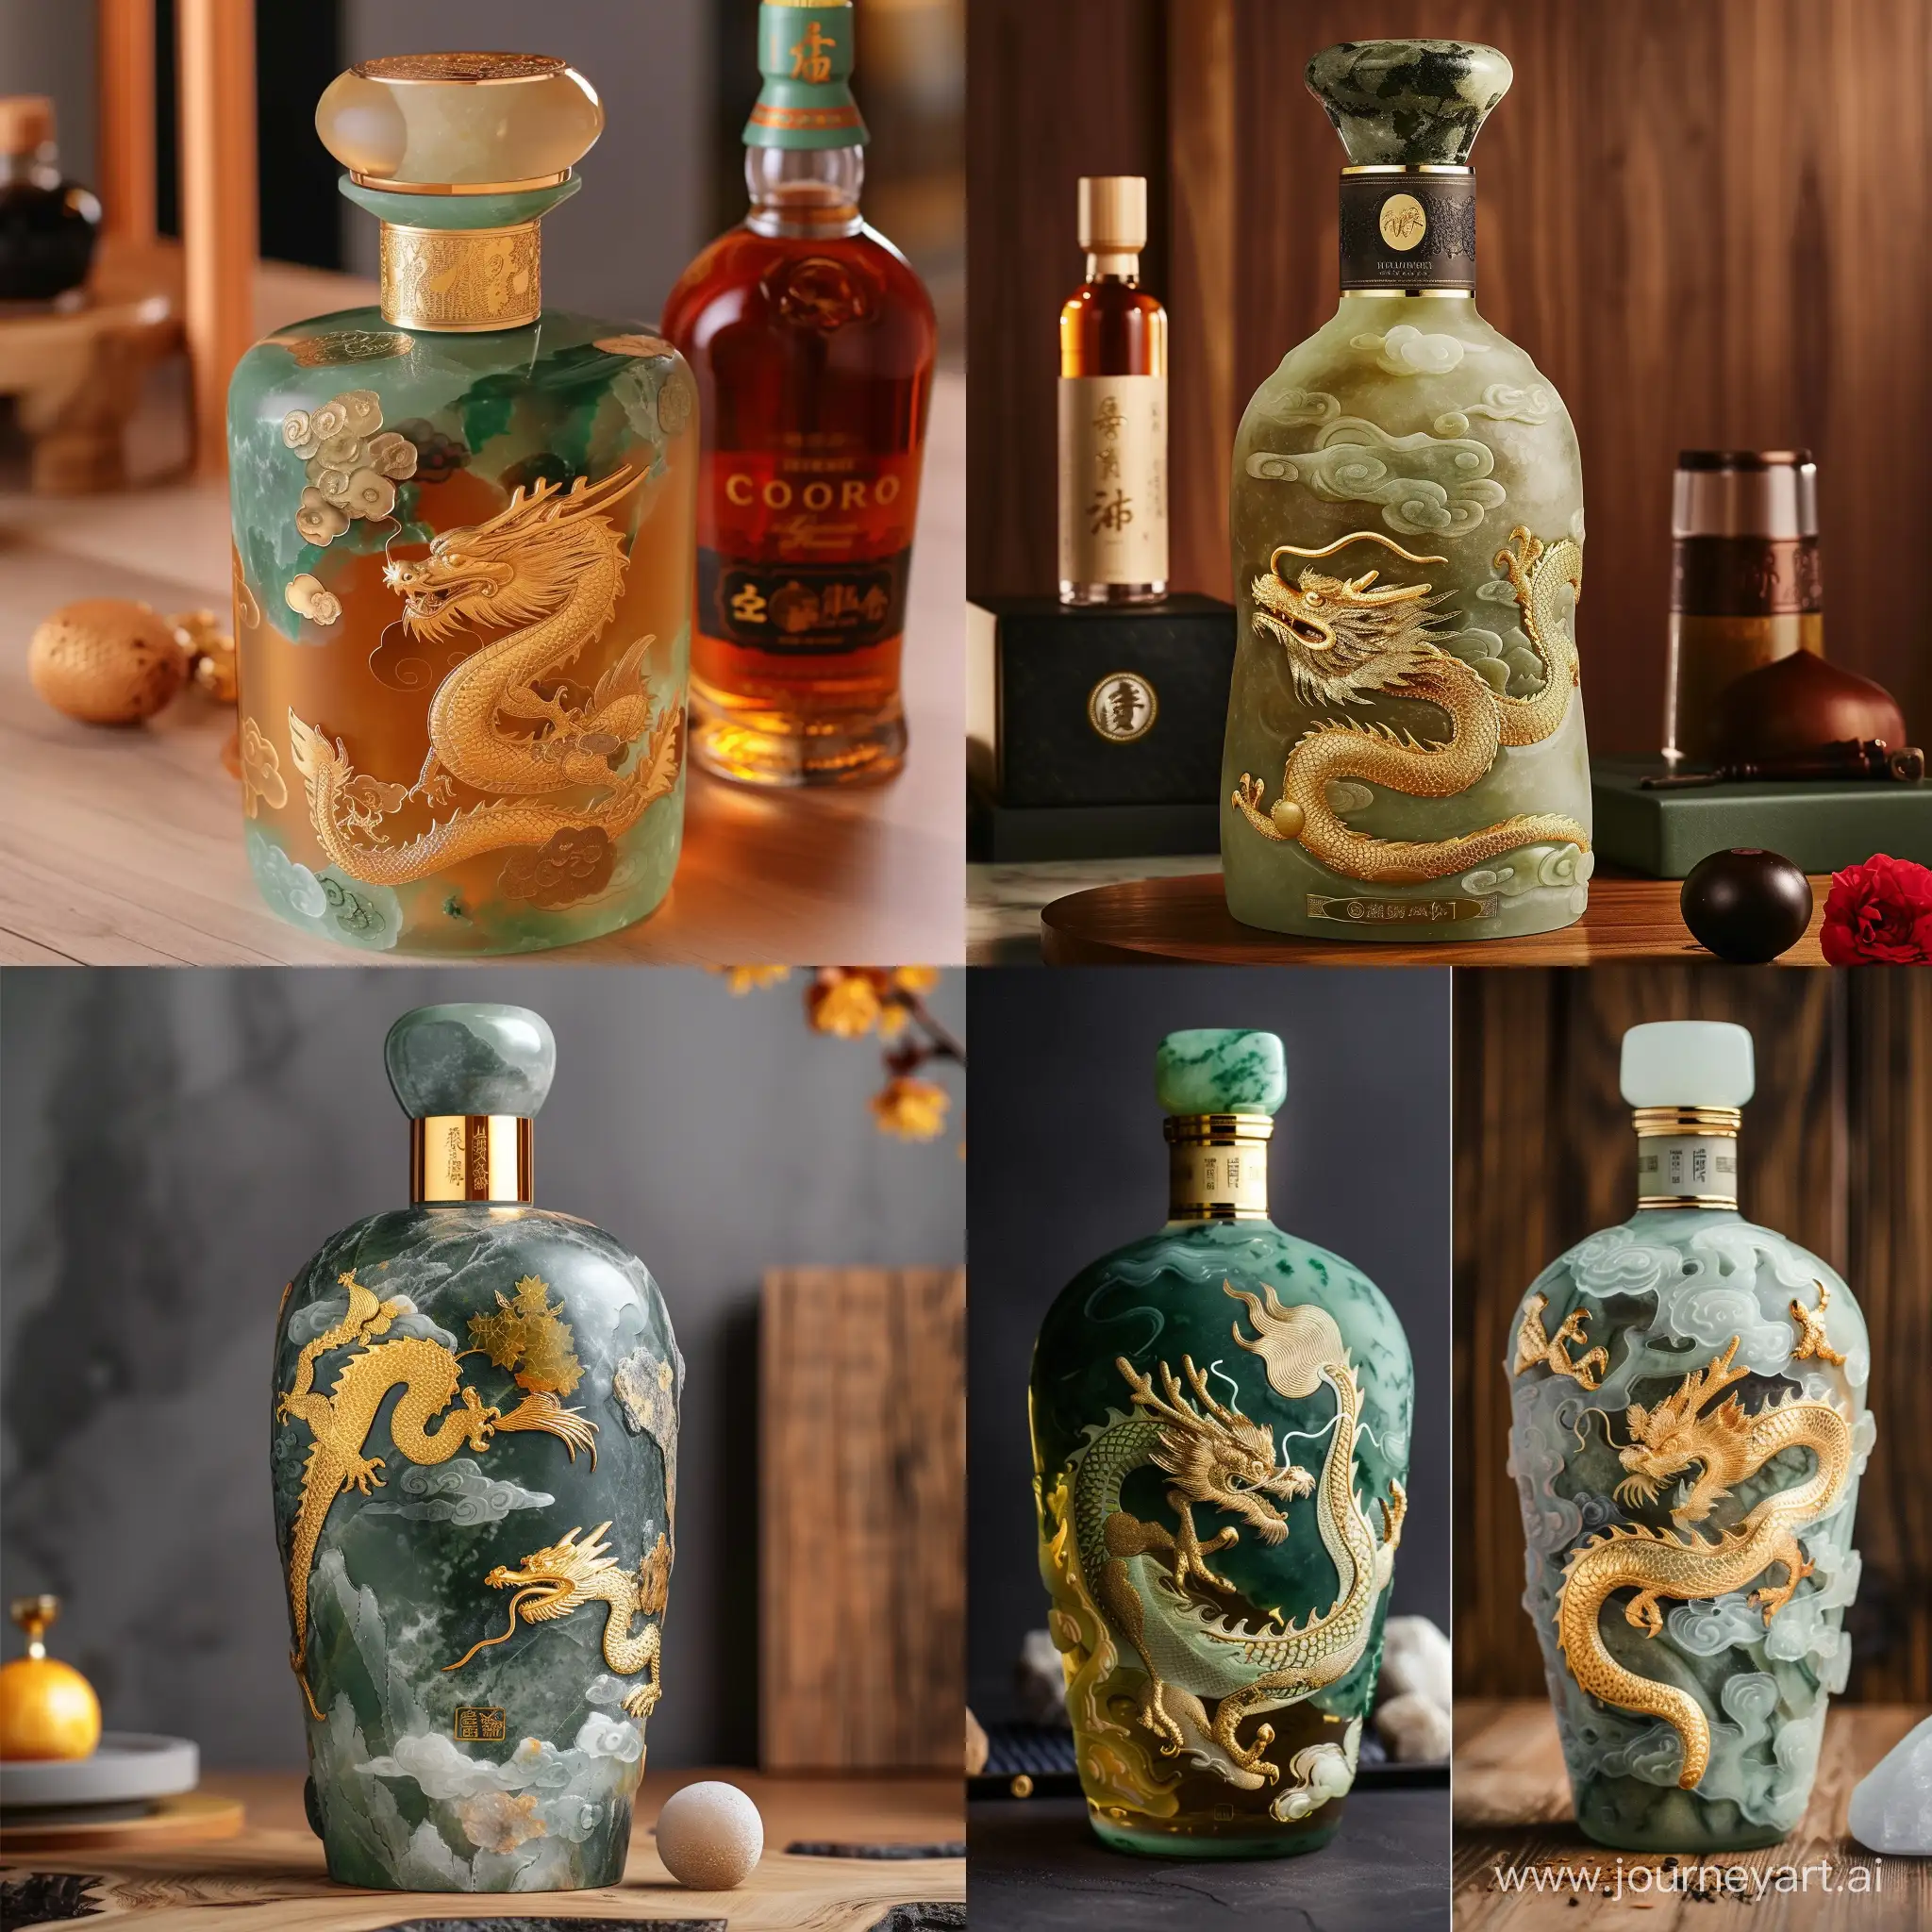 Limited-Edition-100th-Anniversary-Whisky-Bottle-with-Jade-and-Gold-Dragon-Design